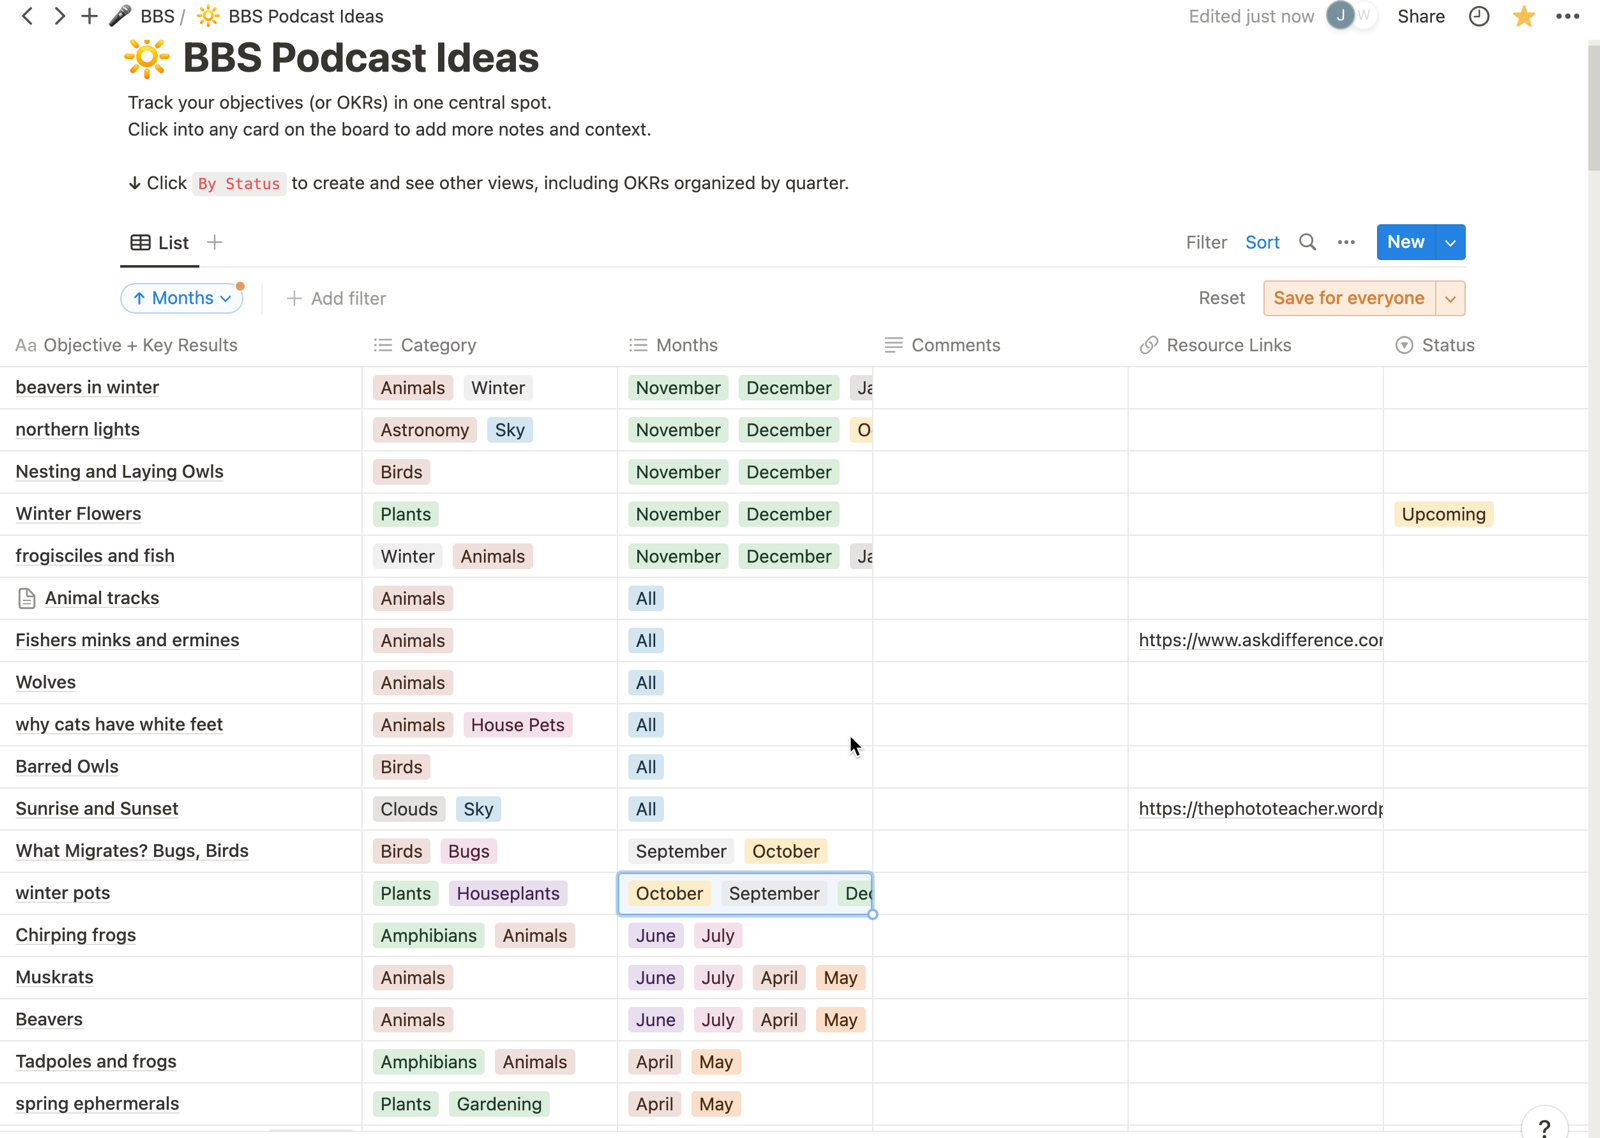 a list of podcast ideas with tags for months and categories